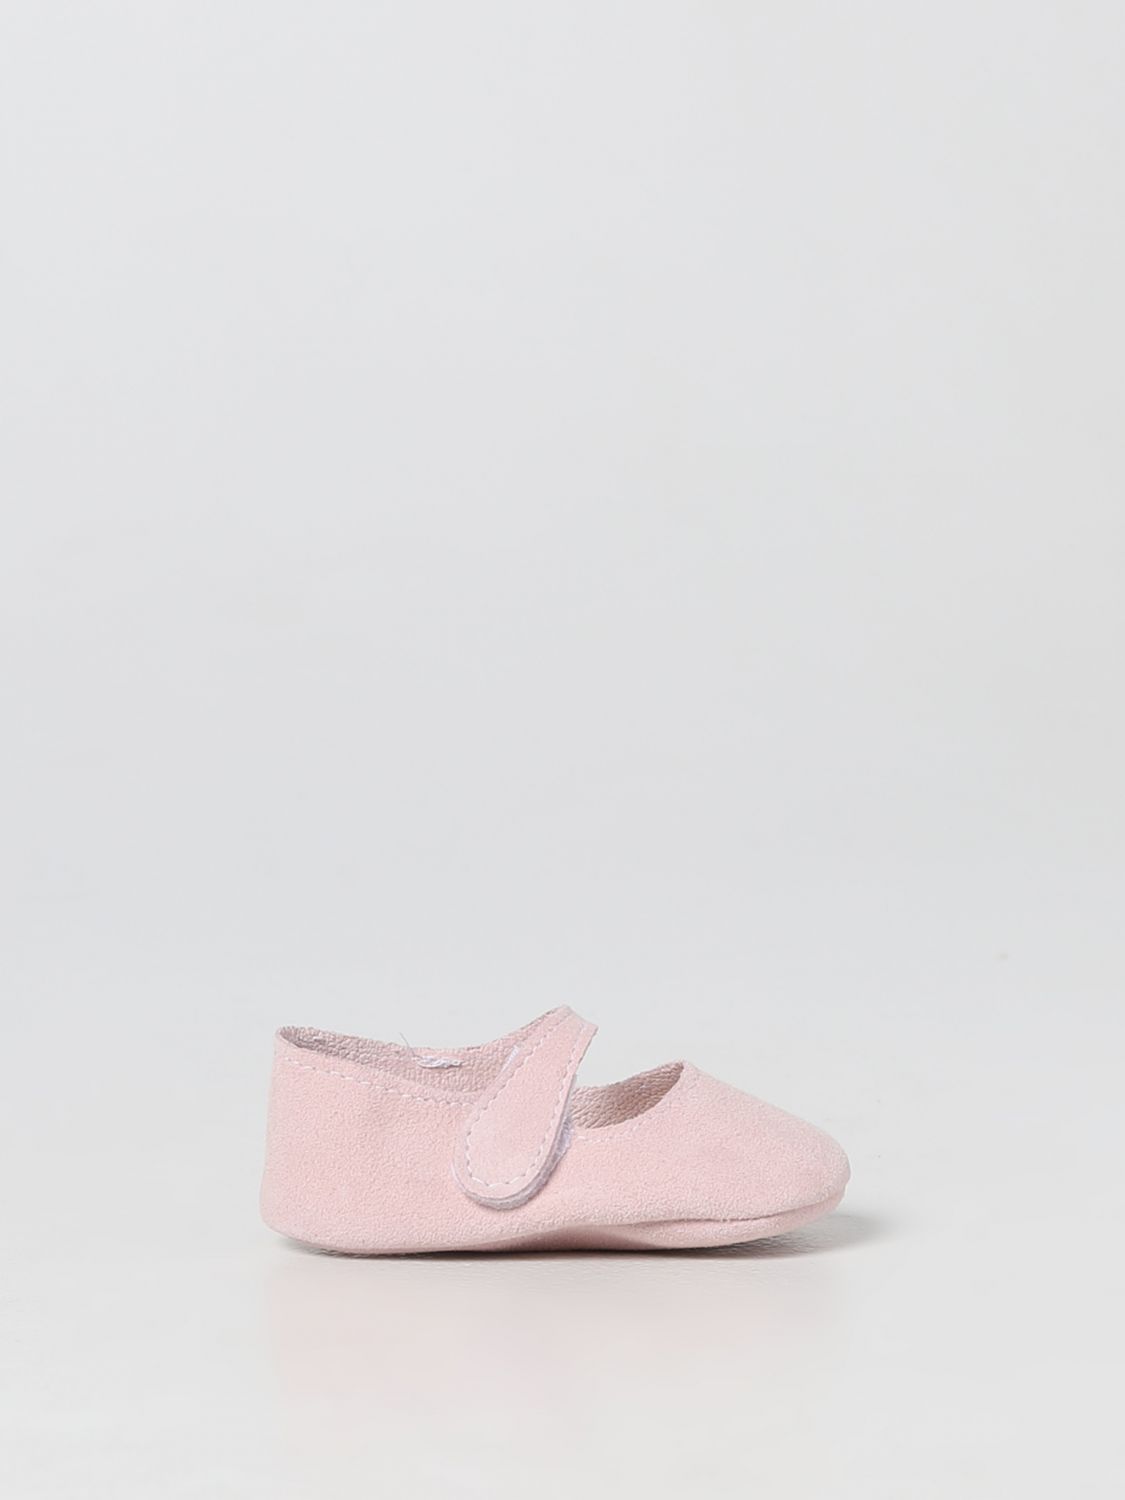 Paz Rodriguez Babies' Shoes  Kids In Pink